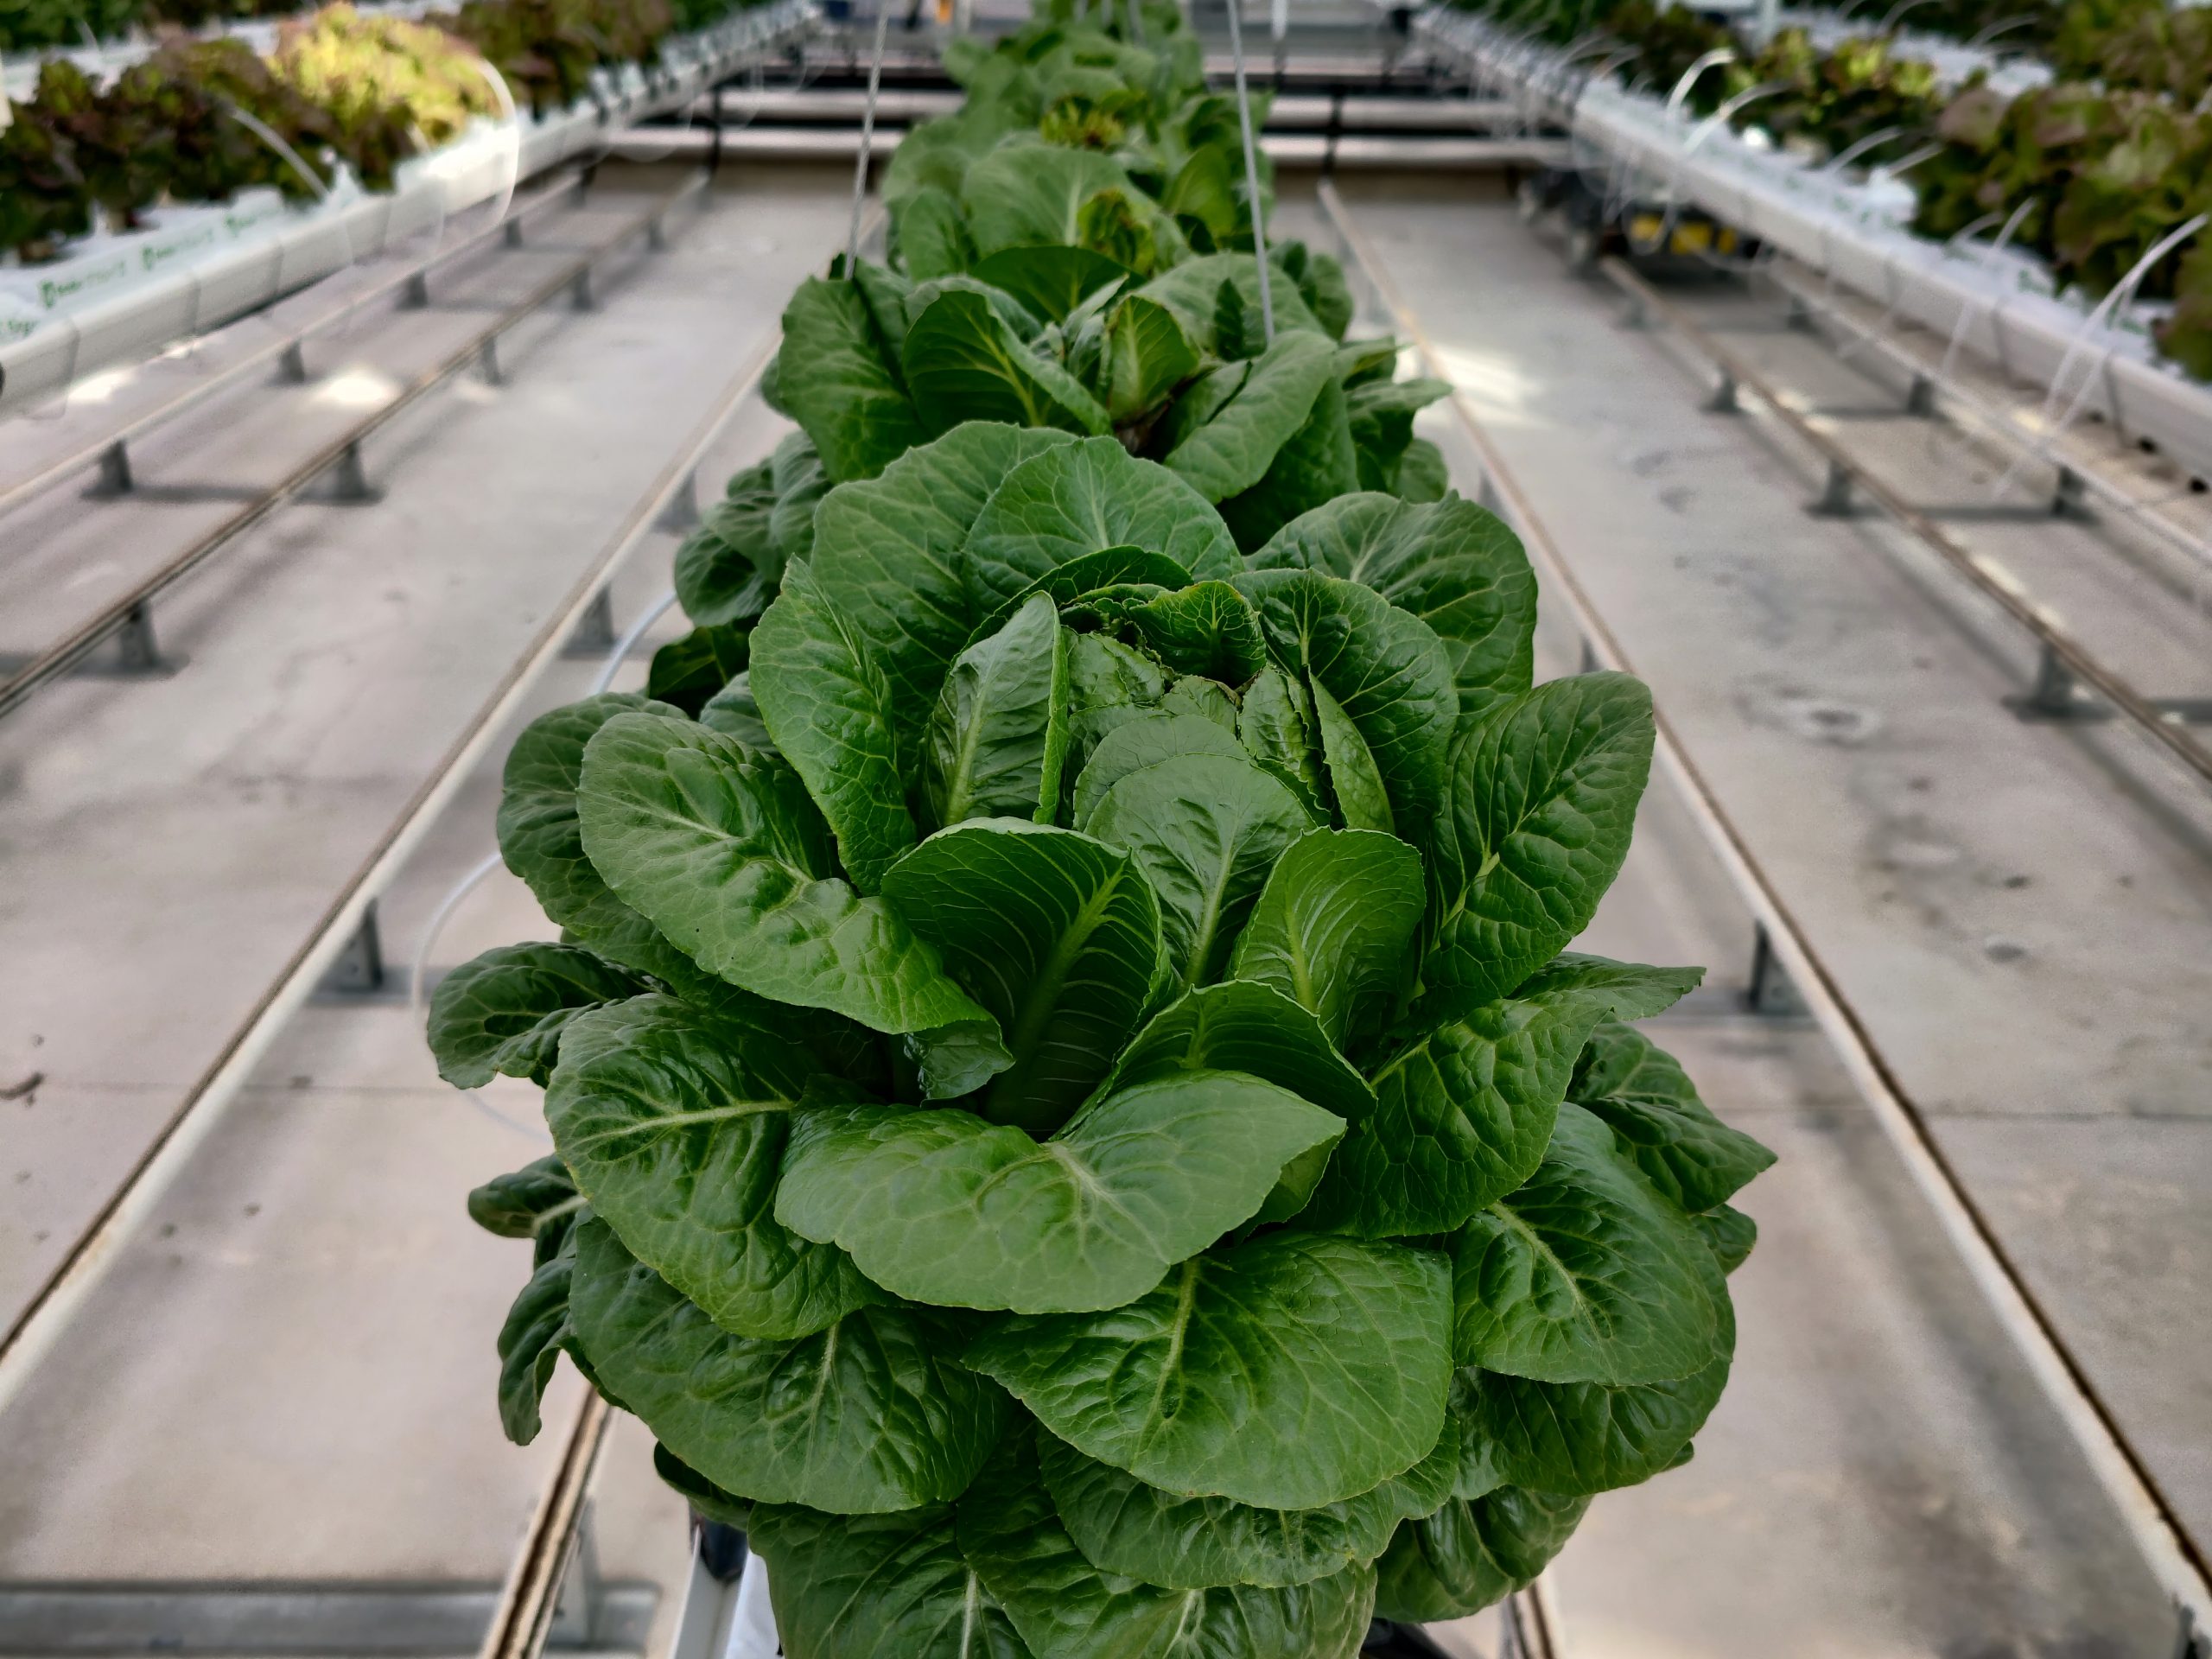 In the recently completed 'Smart Glass' project, scientists at Western Sydney University showed the energy-saving ability of SG ULR-80 and the yield-increasing potential of LLEAF. Next steps? To combine the strengths of both.